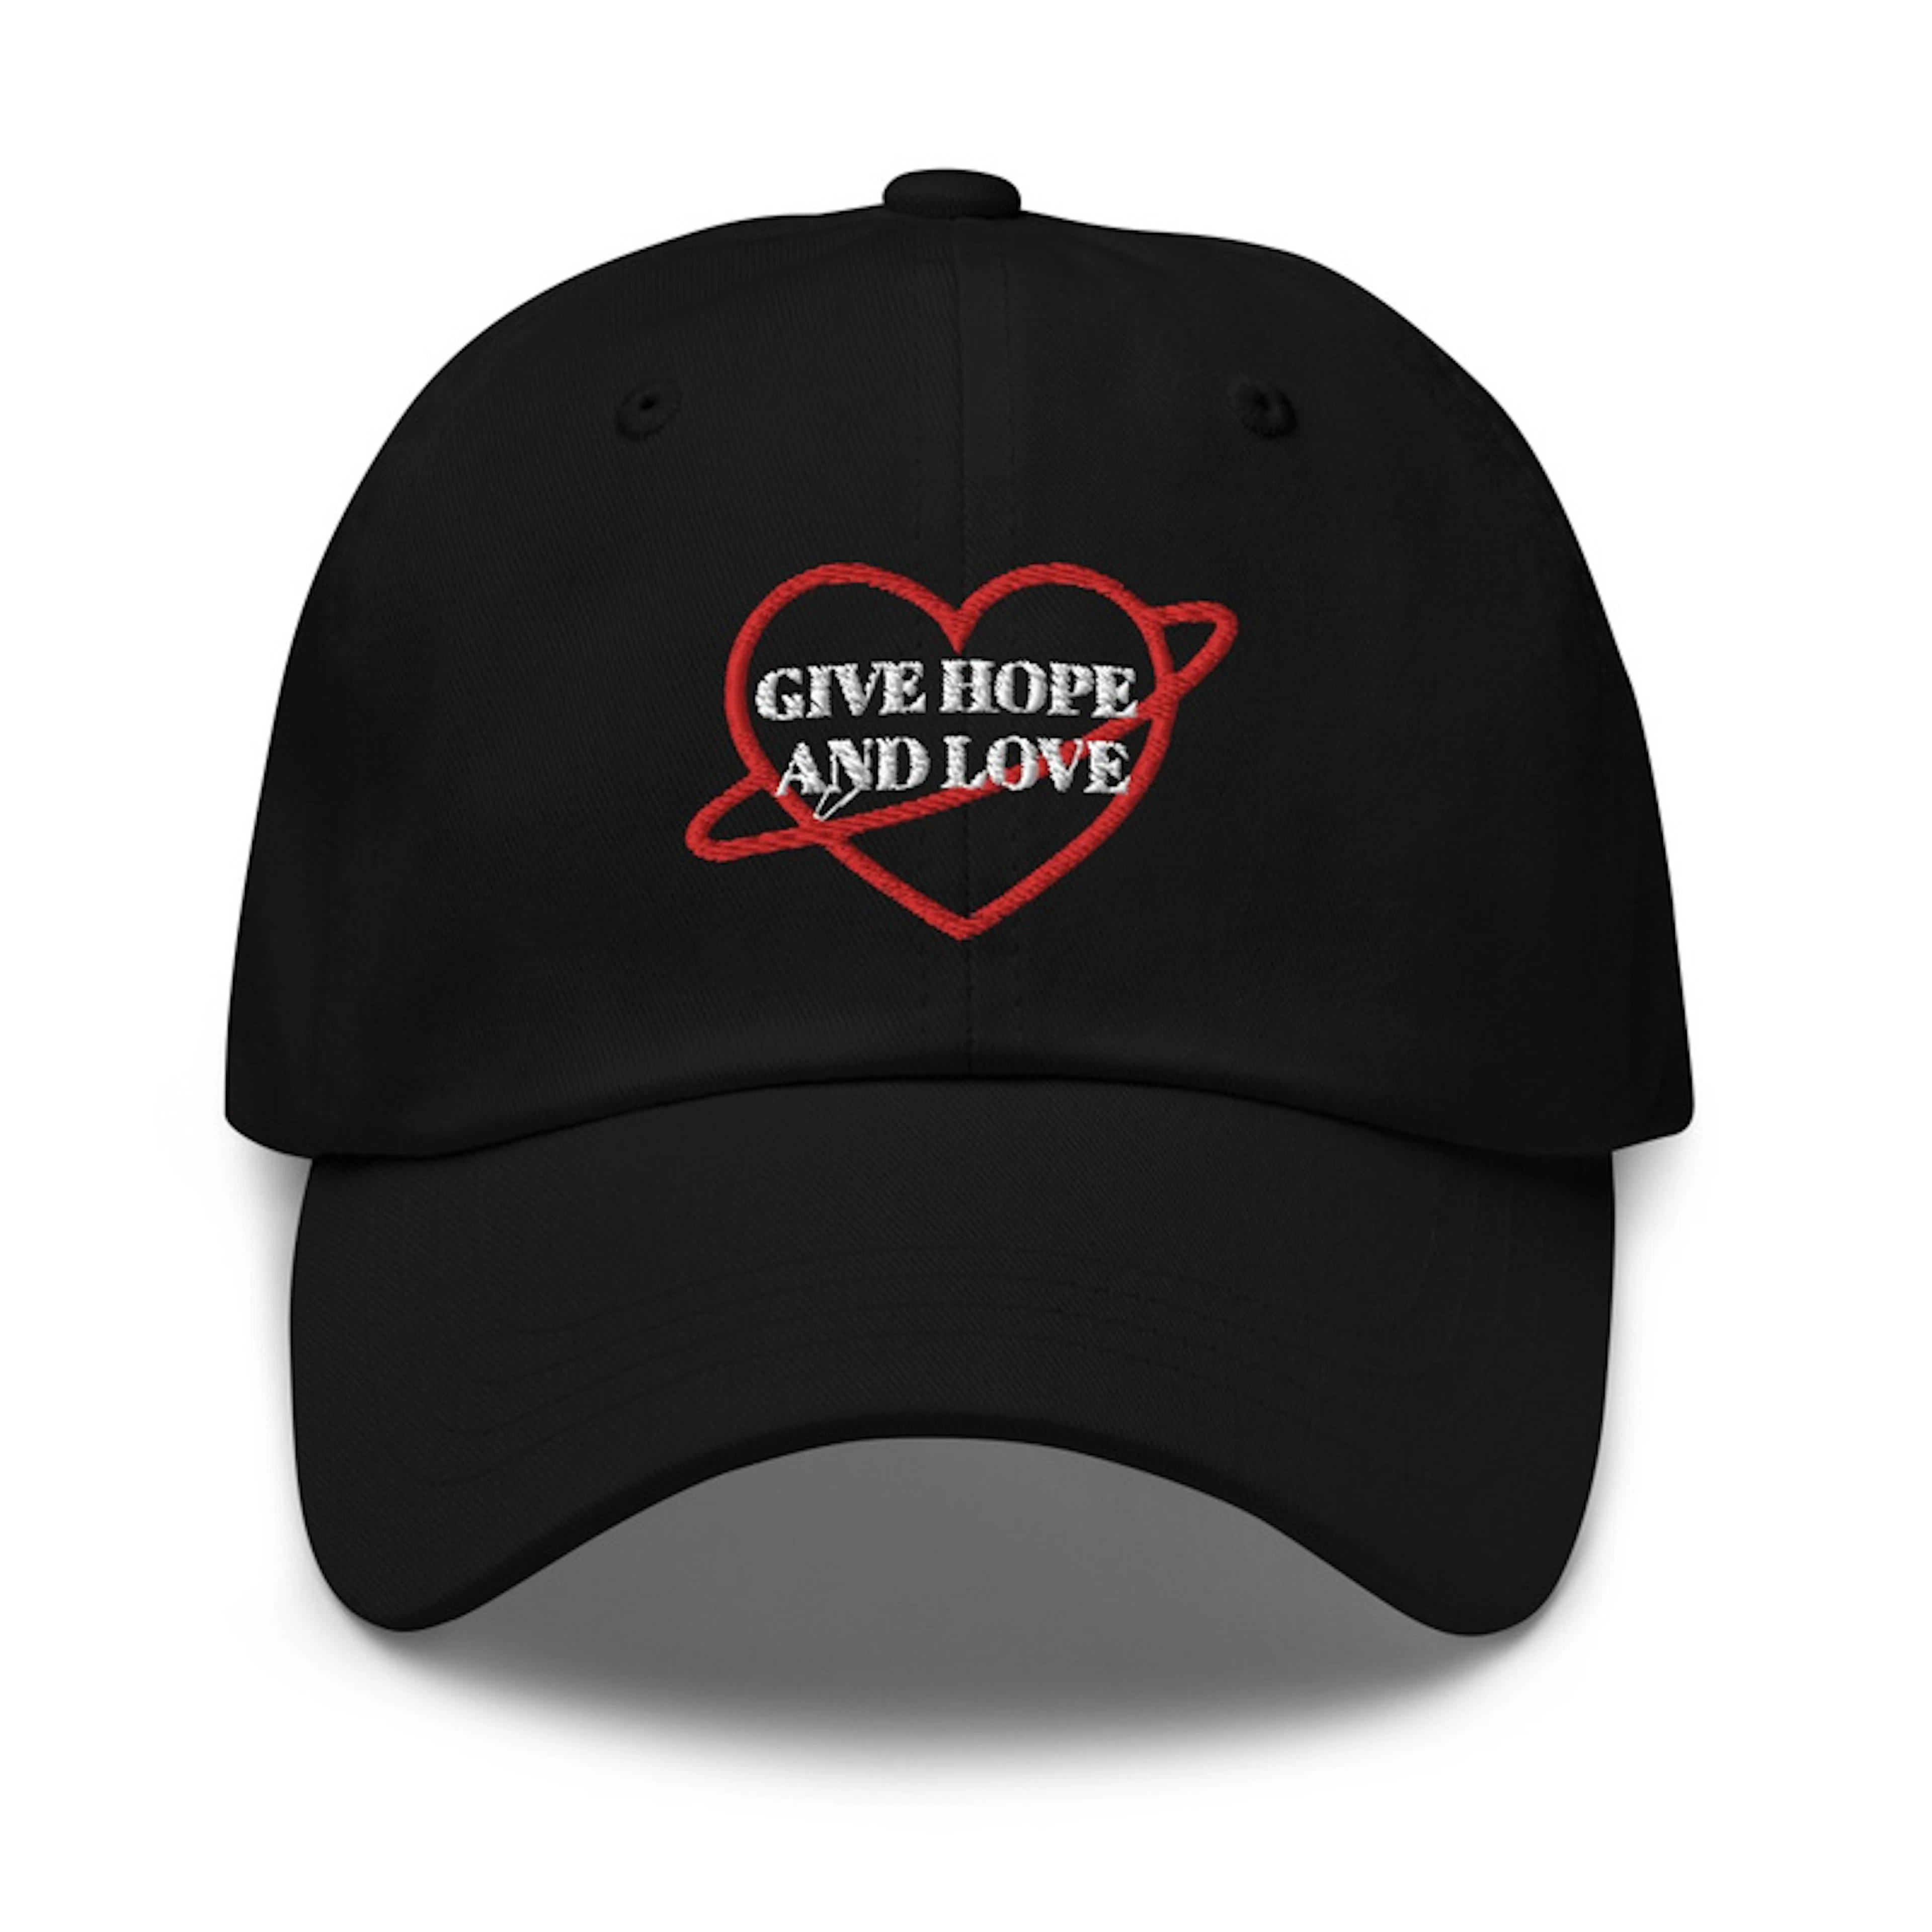 GIVE HOPE AND LOVE HAT